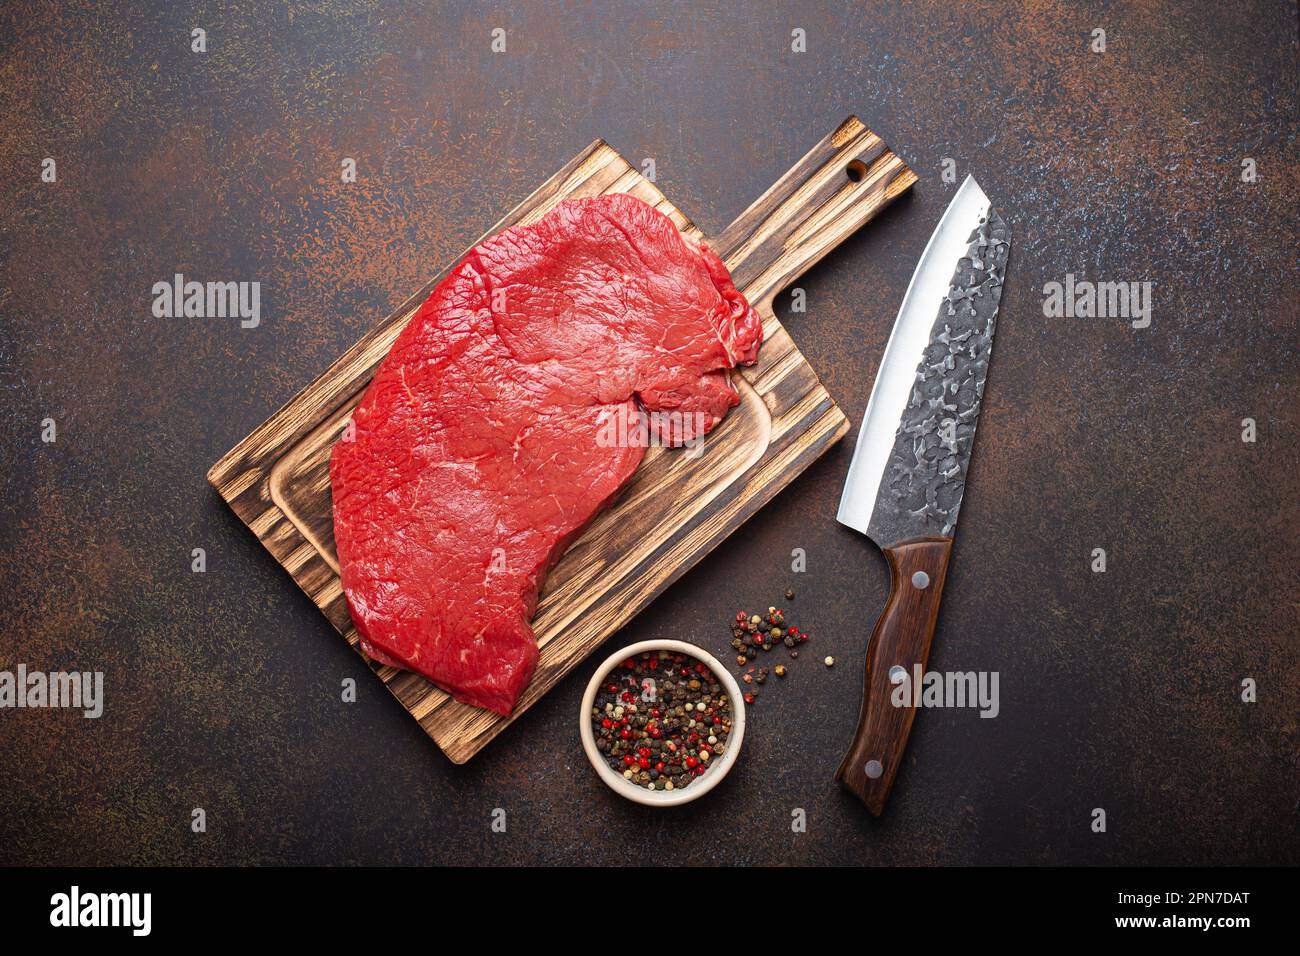 https://c8.alamy.com/comp/2PN7DAT/raw-uncooked-top-round-beef-steak-on-wooden-cutting-board-with-big-kitchen-knife-and-pepper-on-dark-brown-rustic-stone-background-top-view-cooking-2PN7DAT.jpg